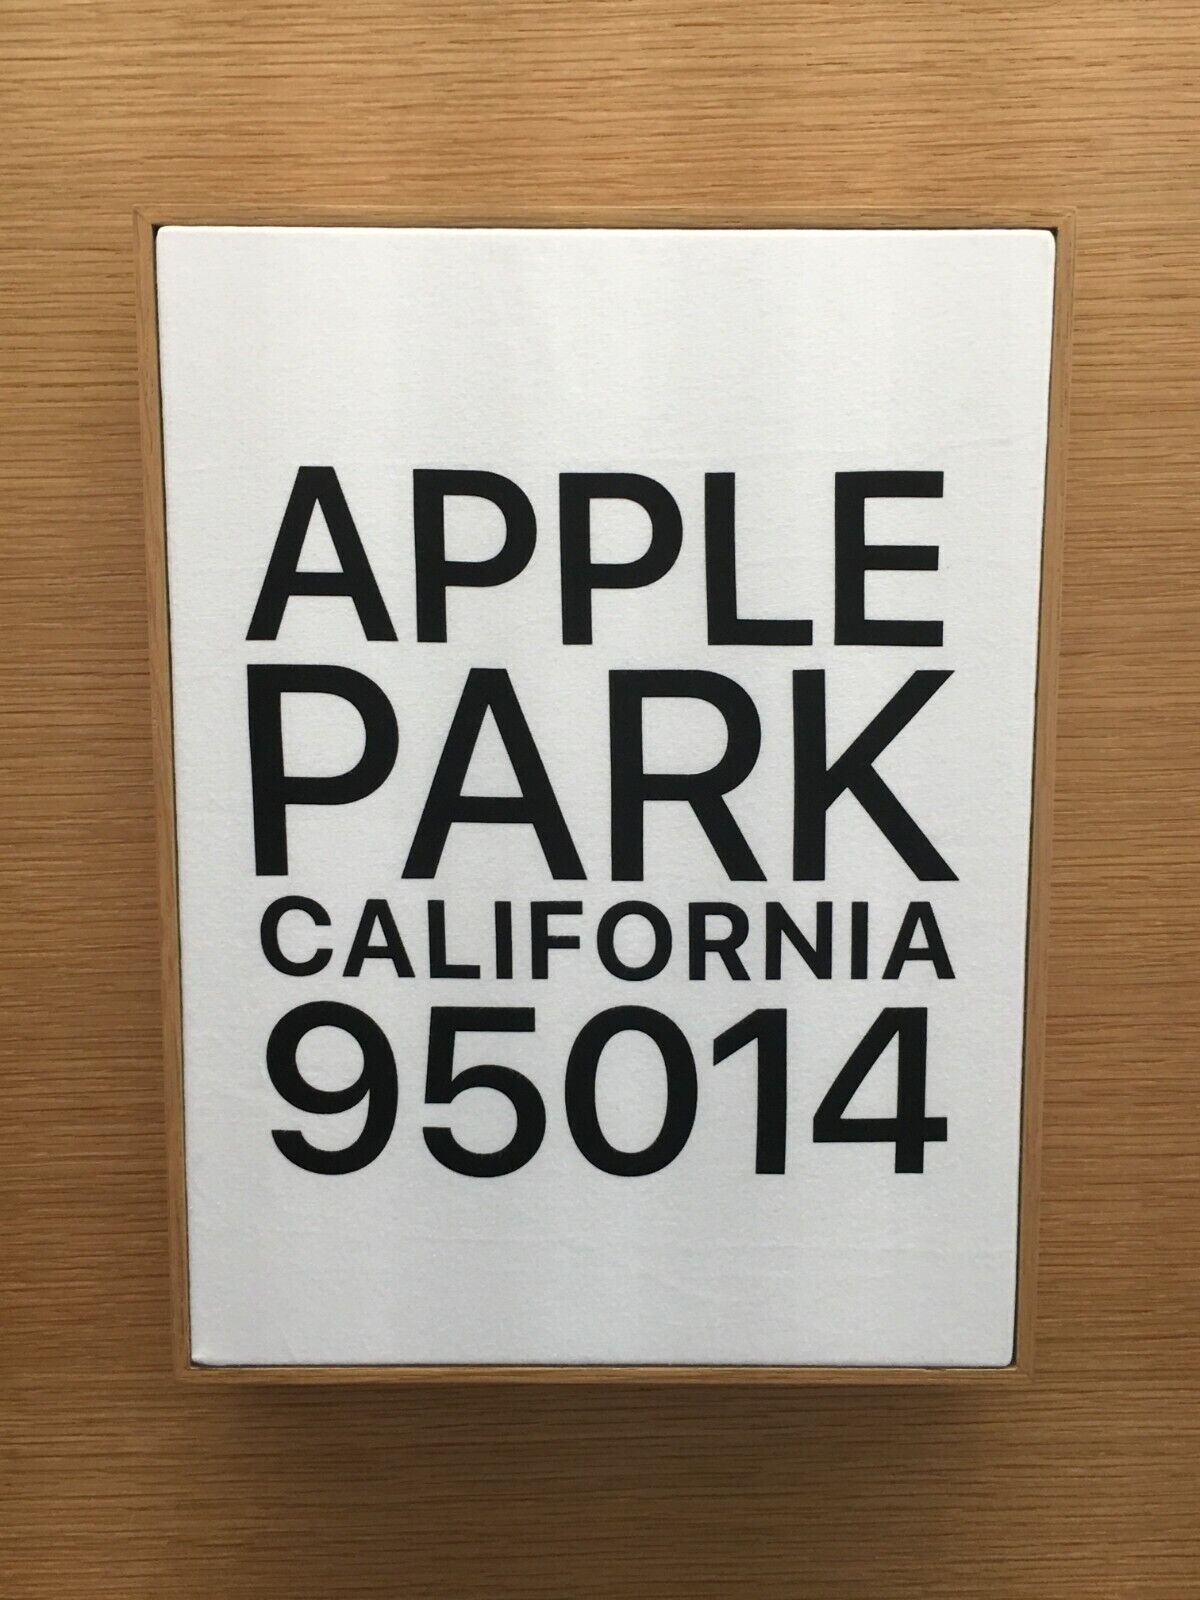 OOP SOLD OUT NEW & BOXED APPLE LOGO PARK HQ ADDRESS SZ MEDIUM WHITE  T-SHIRT